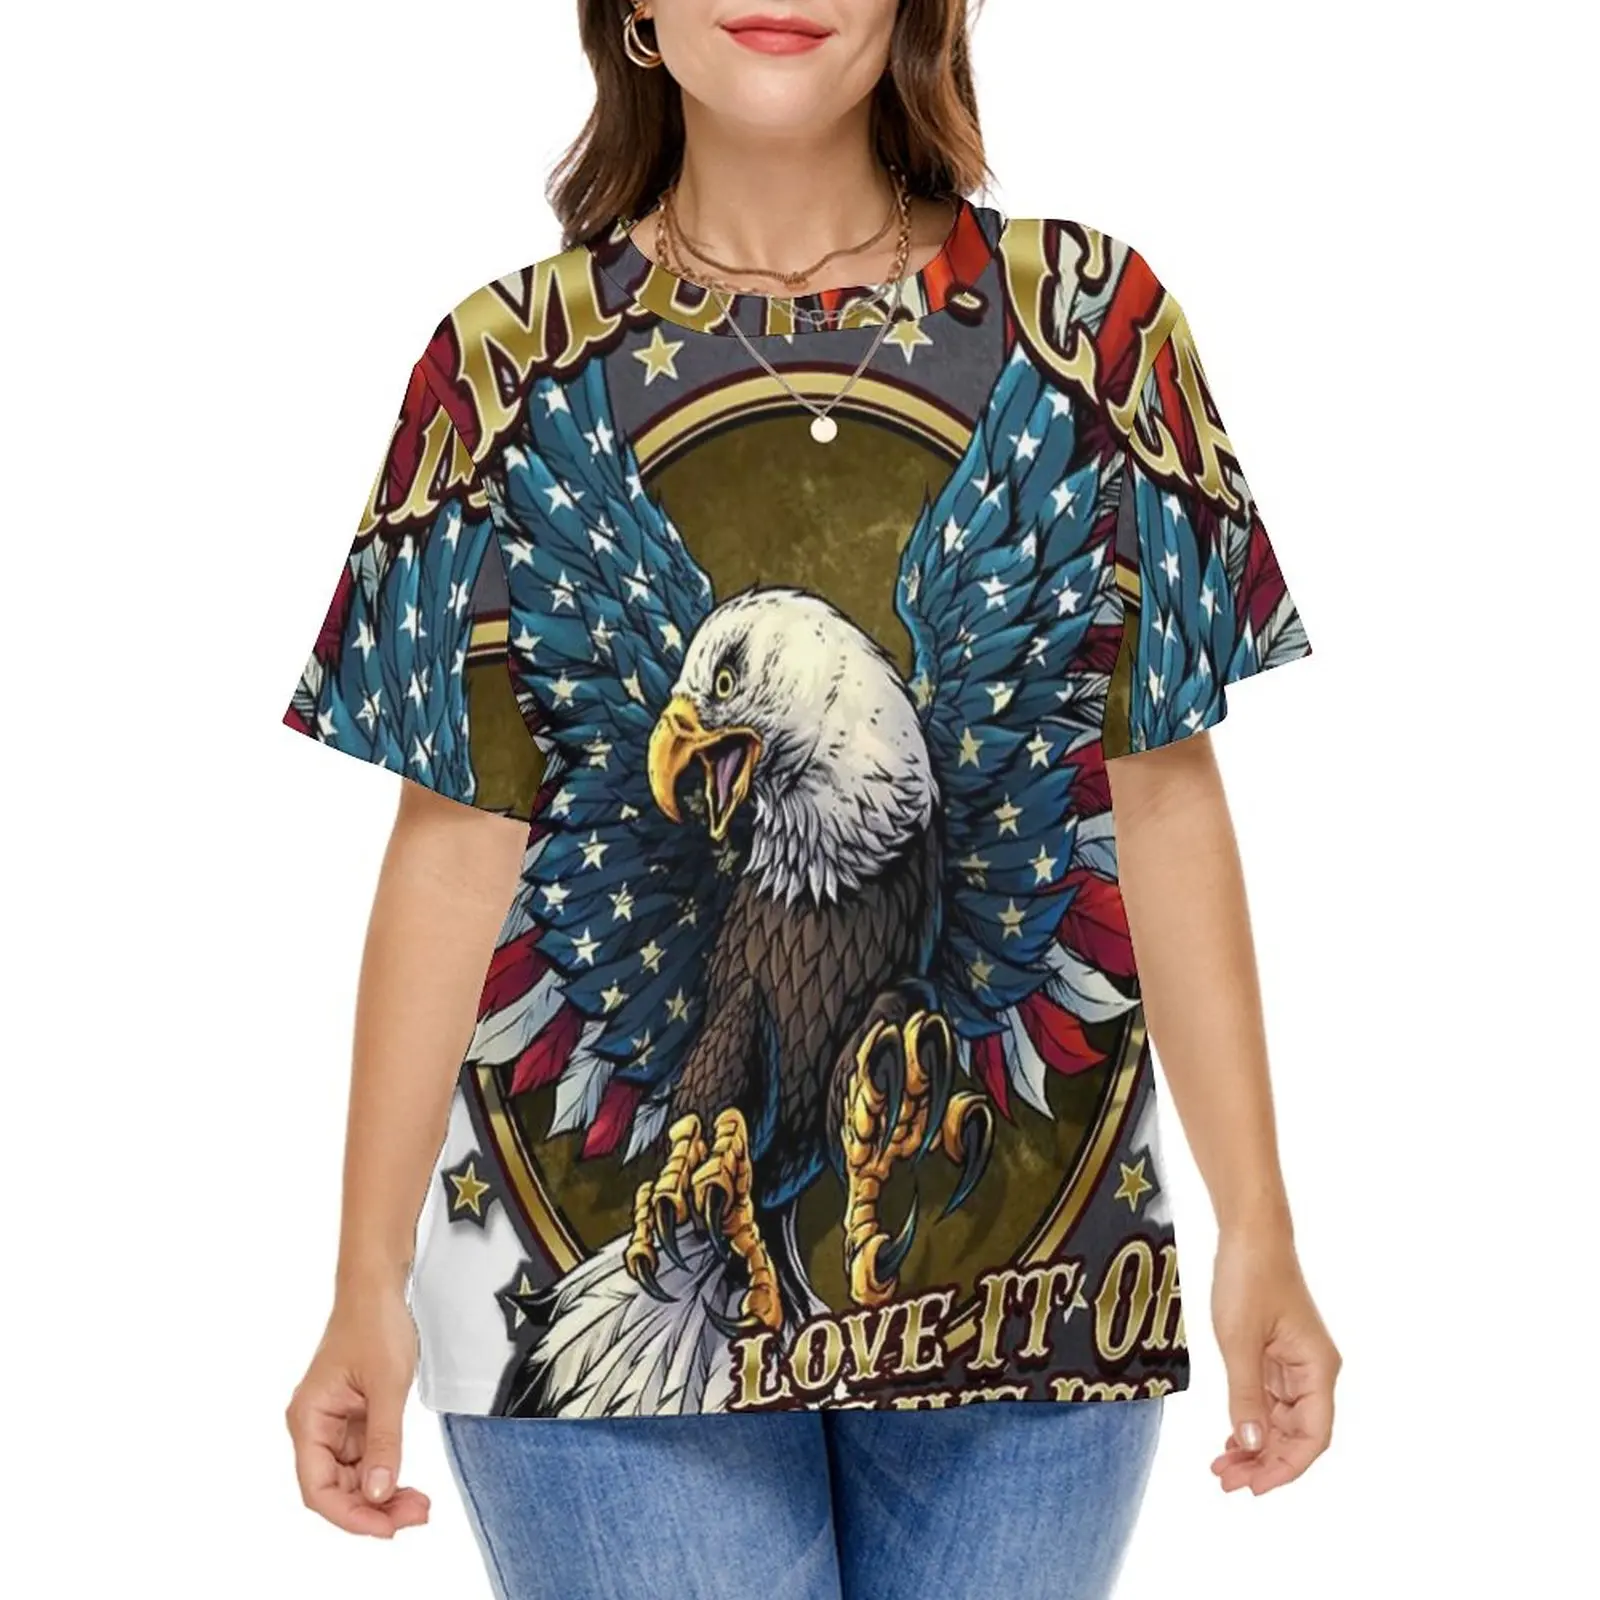 American Eagle T-Shirts Love It Or Leave Basic T Shirt Short Sleeve Aesthetic Tees Plus Size 5XL 6XL Summer Clothing Gift Idea